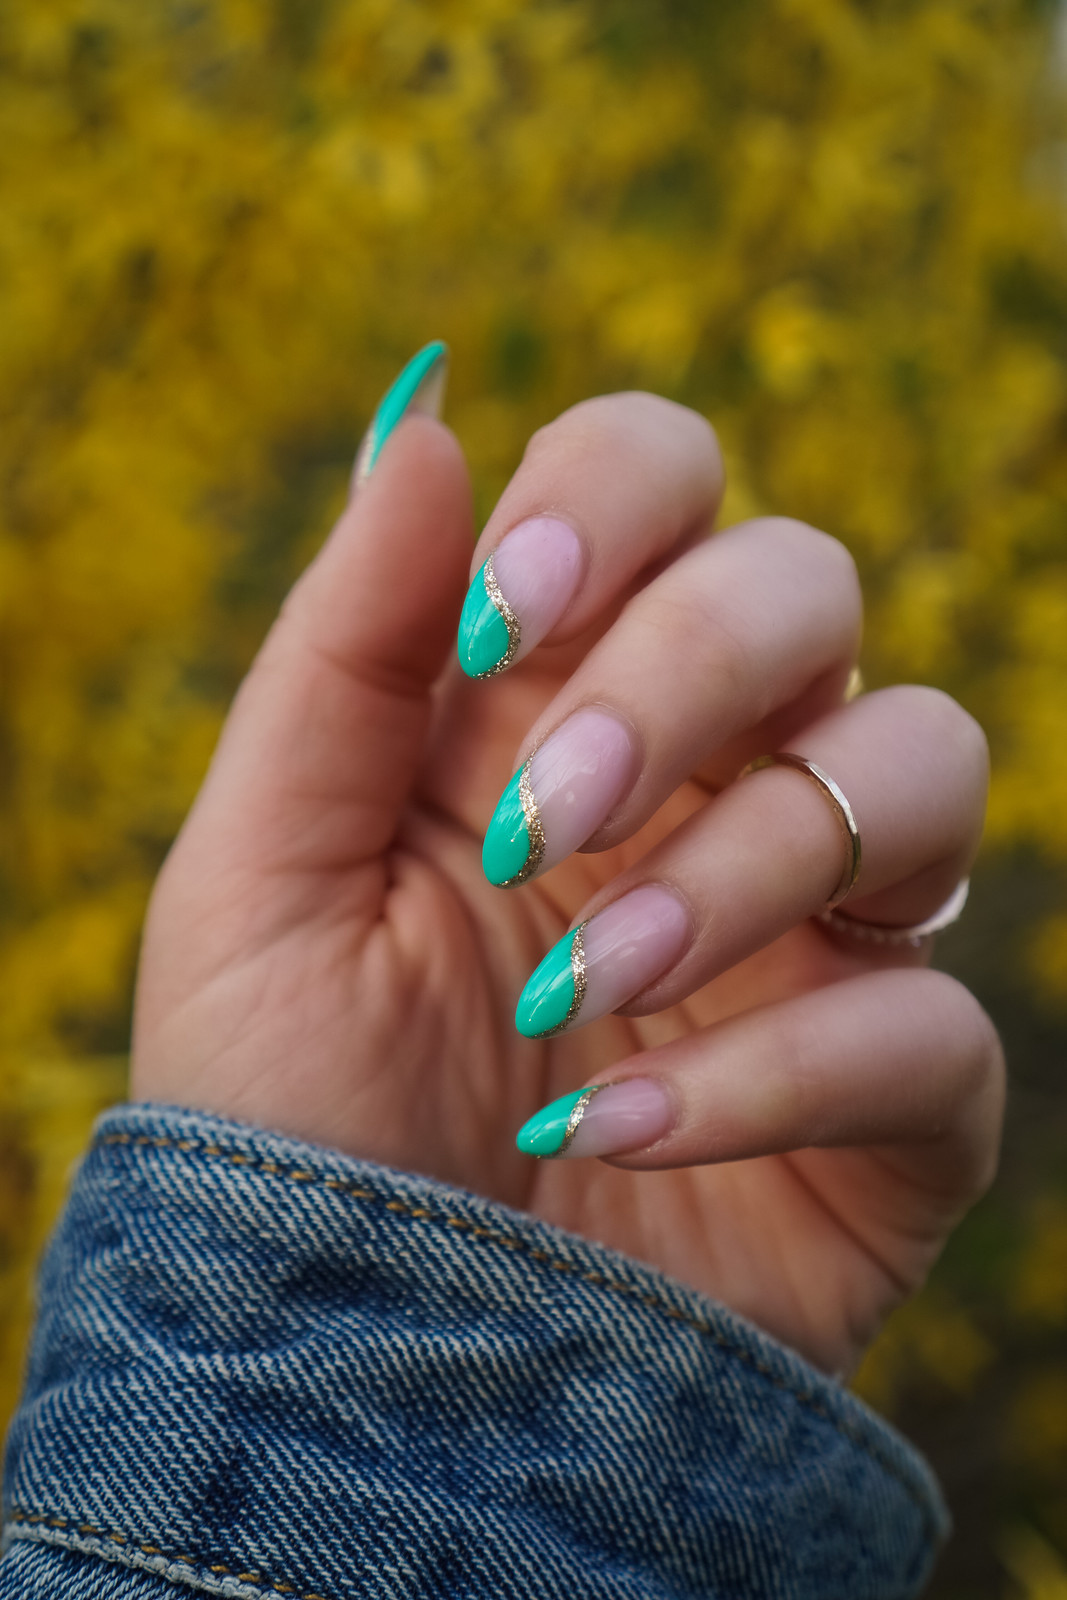 Manicure of the Month: Green Summer Nails | Green Manicure | Colored French Manicure | Acrylic Nails | Almond Nails | Cute Summer Nails | Fun Summer Nails | Spring Nail Ideas 